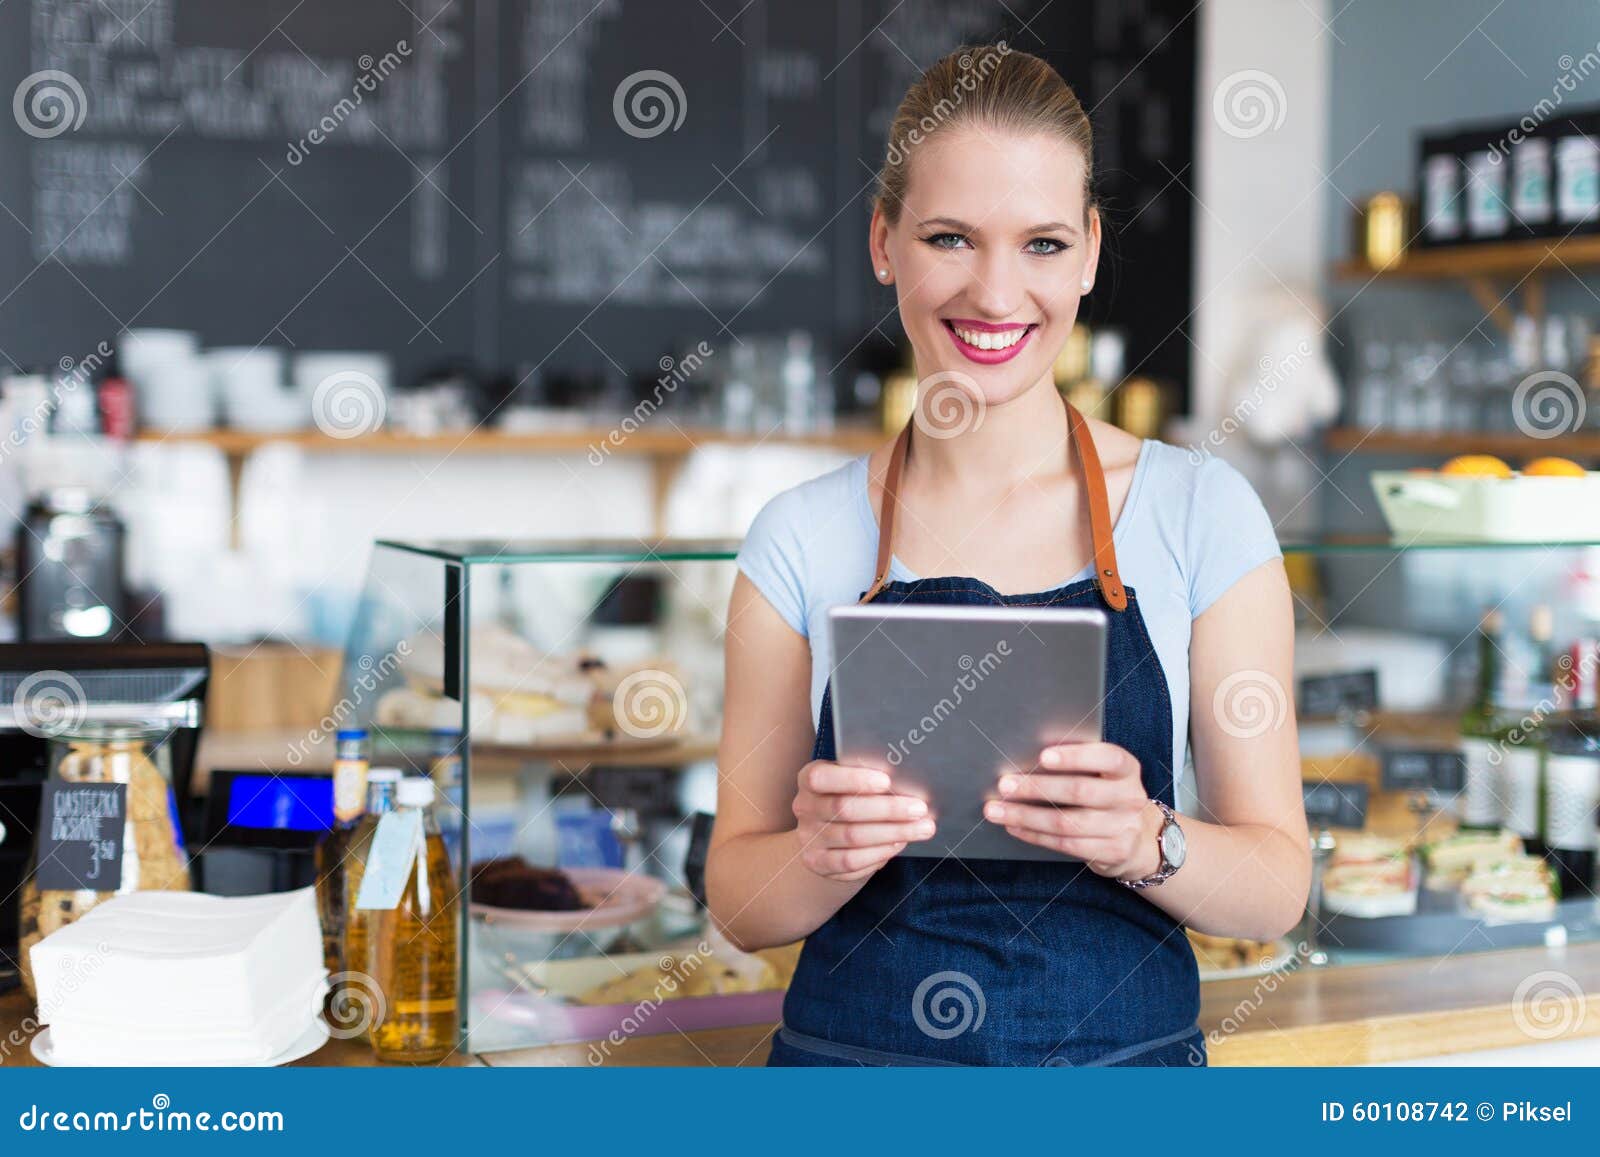 woman working at cafe